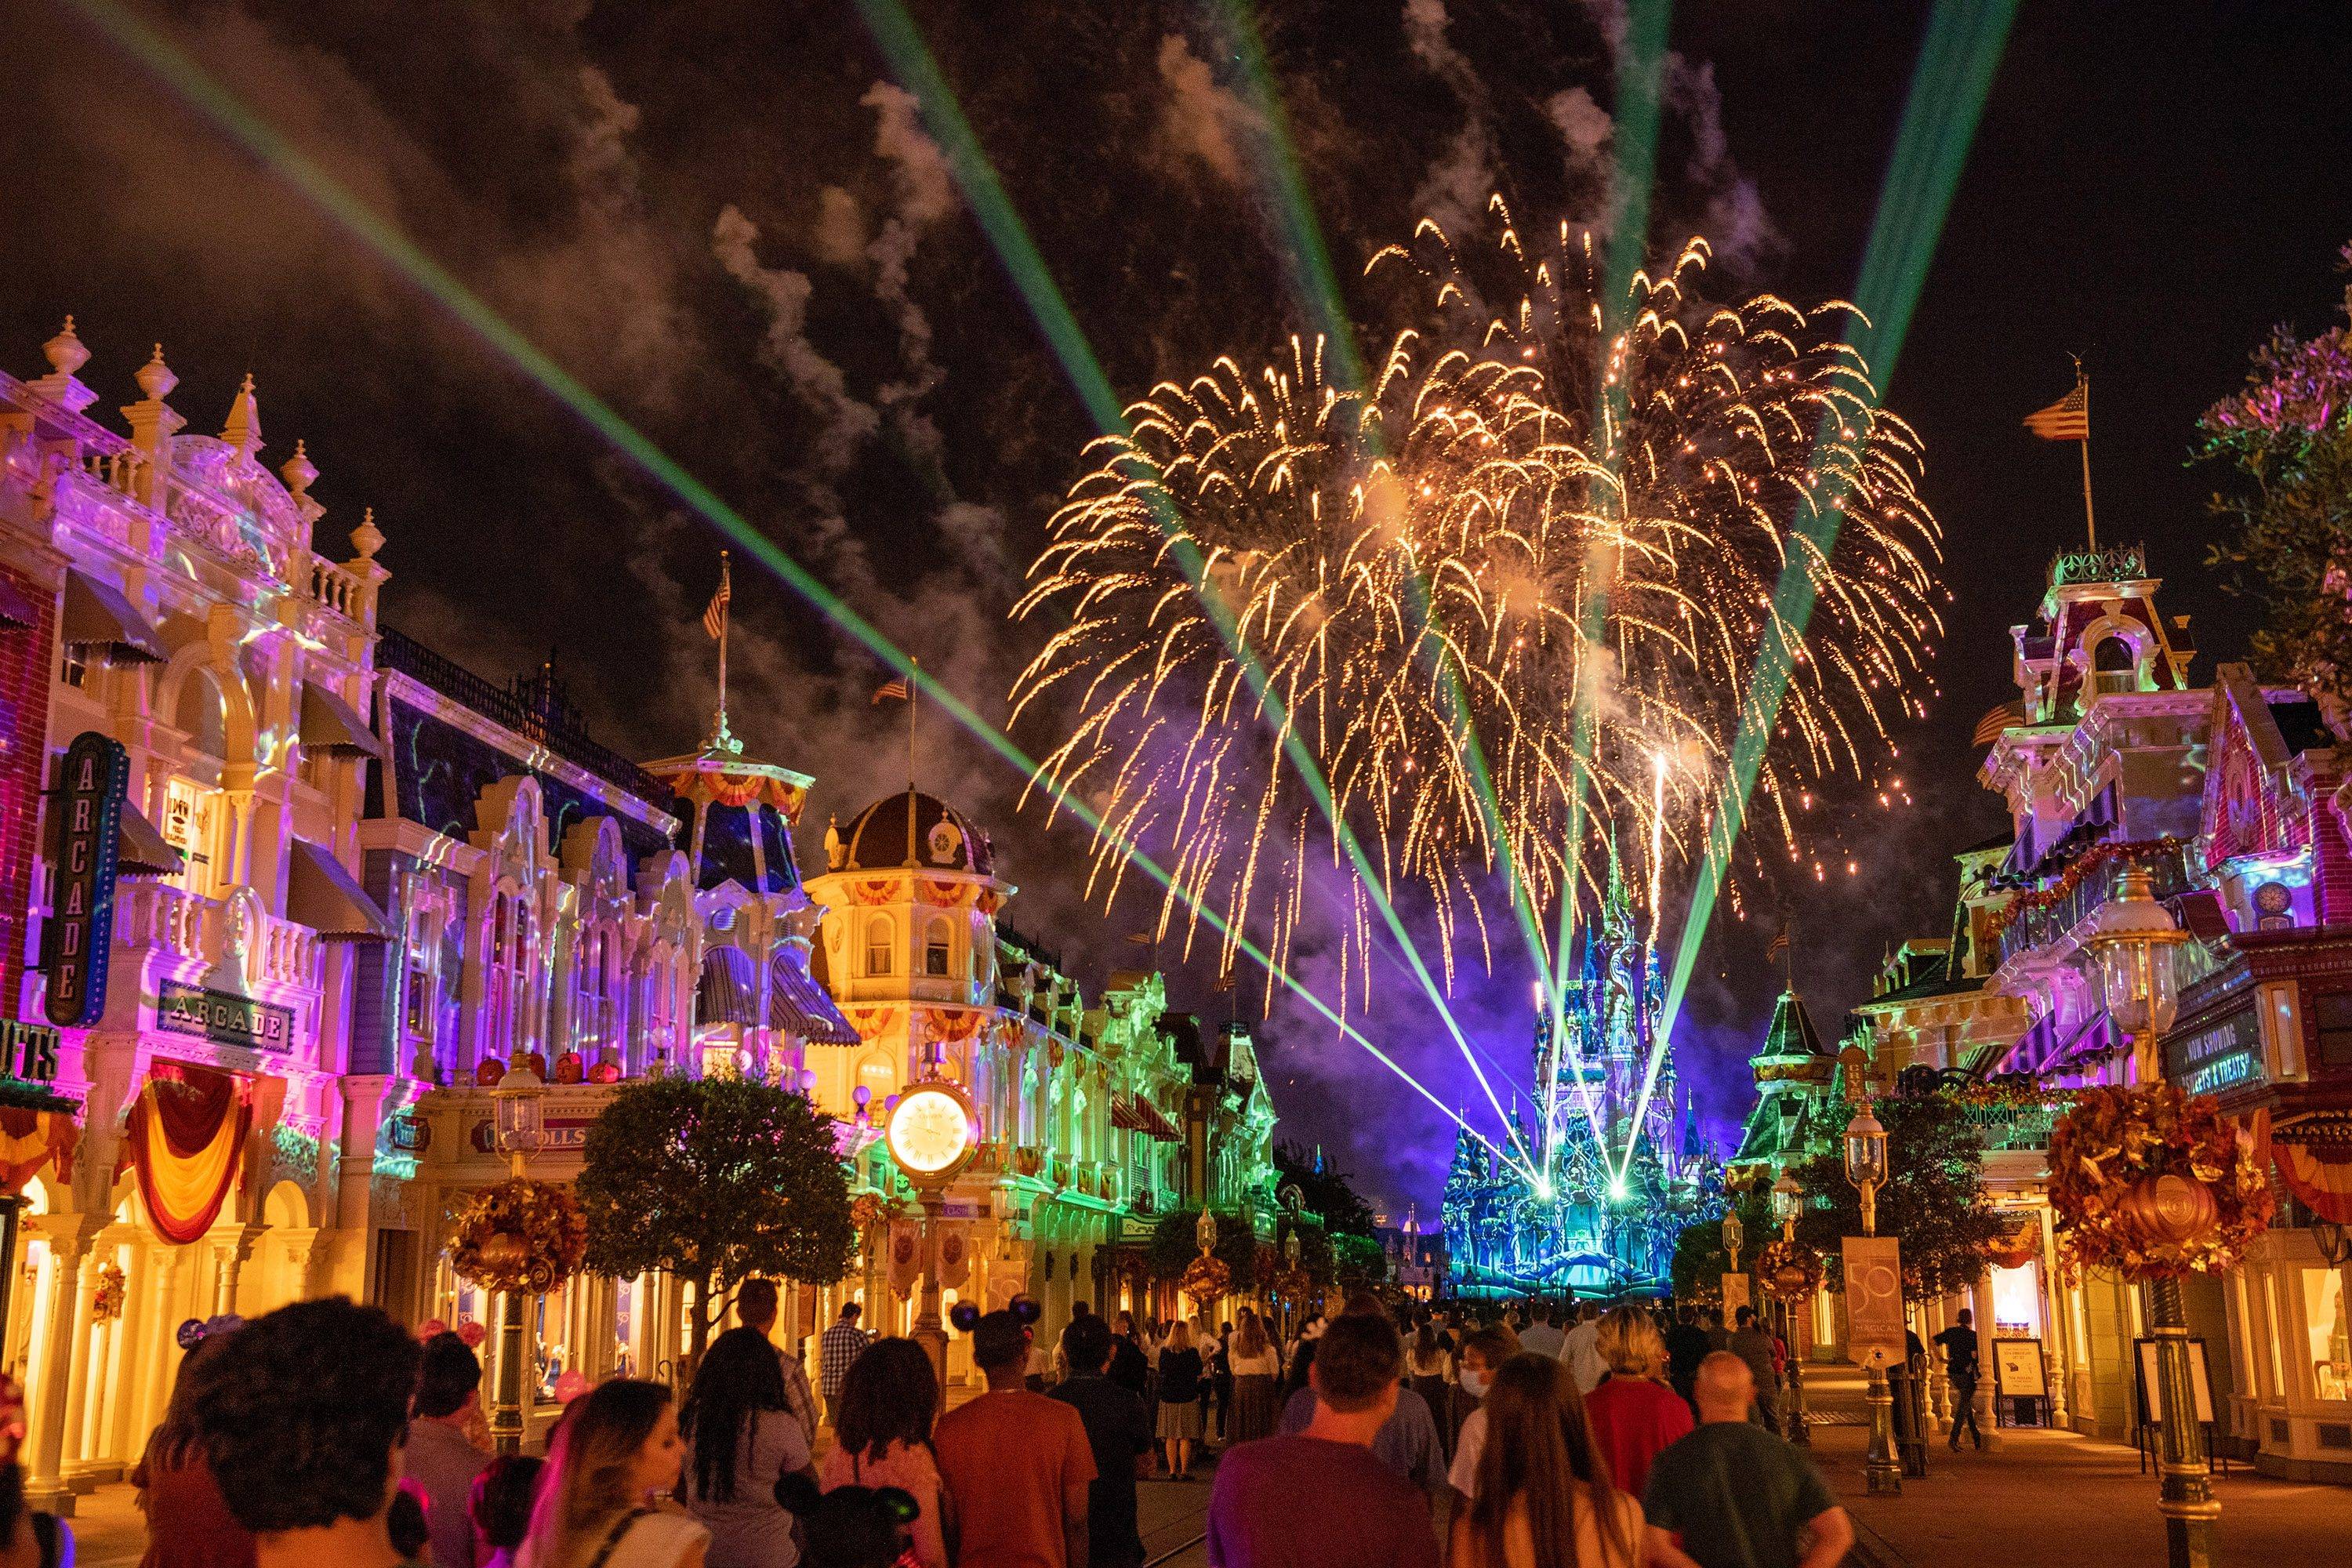 Disney Enchantment has been poorly received by guests